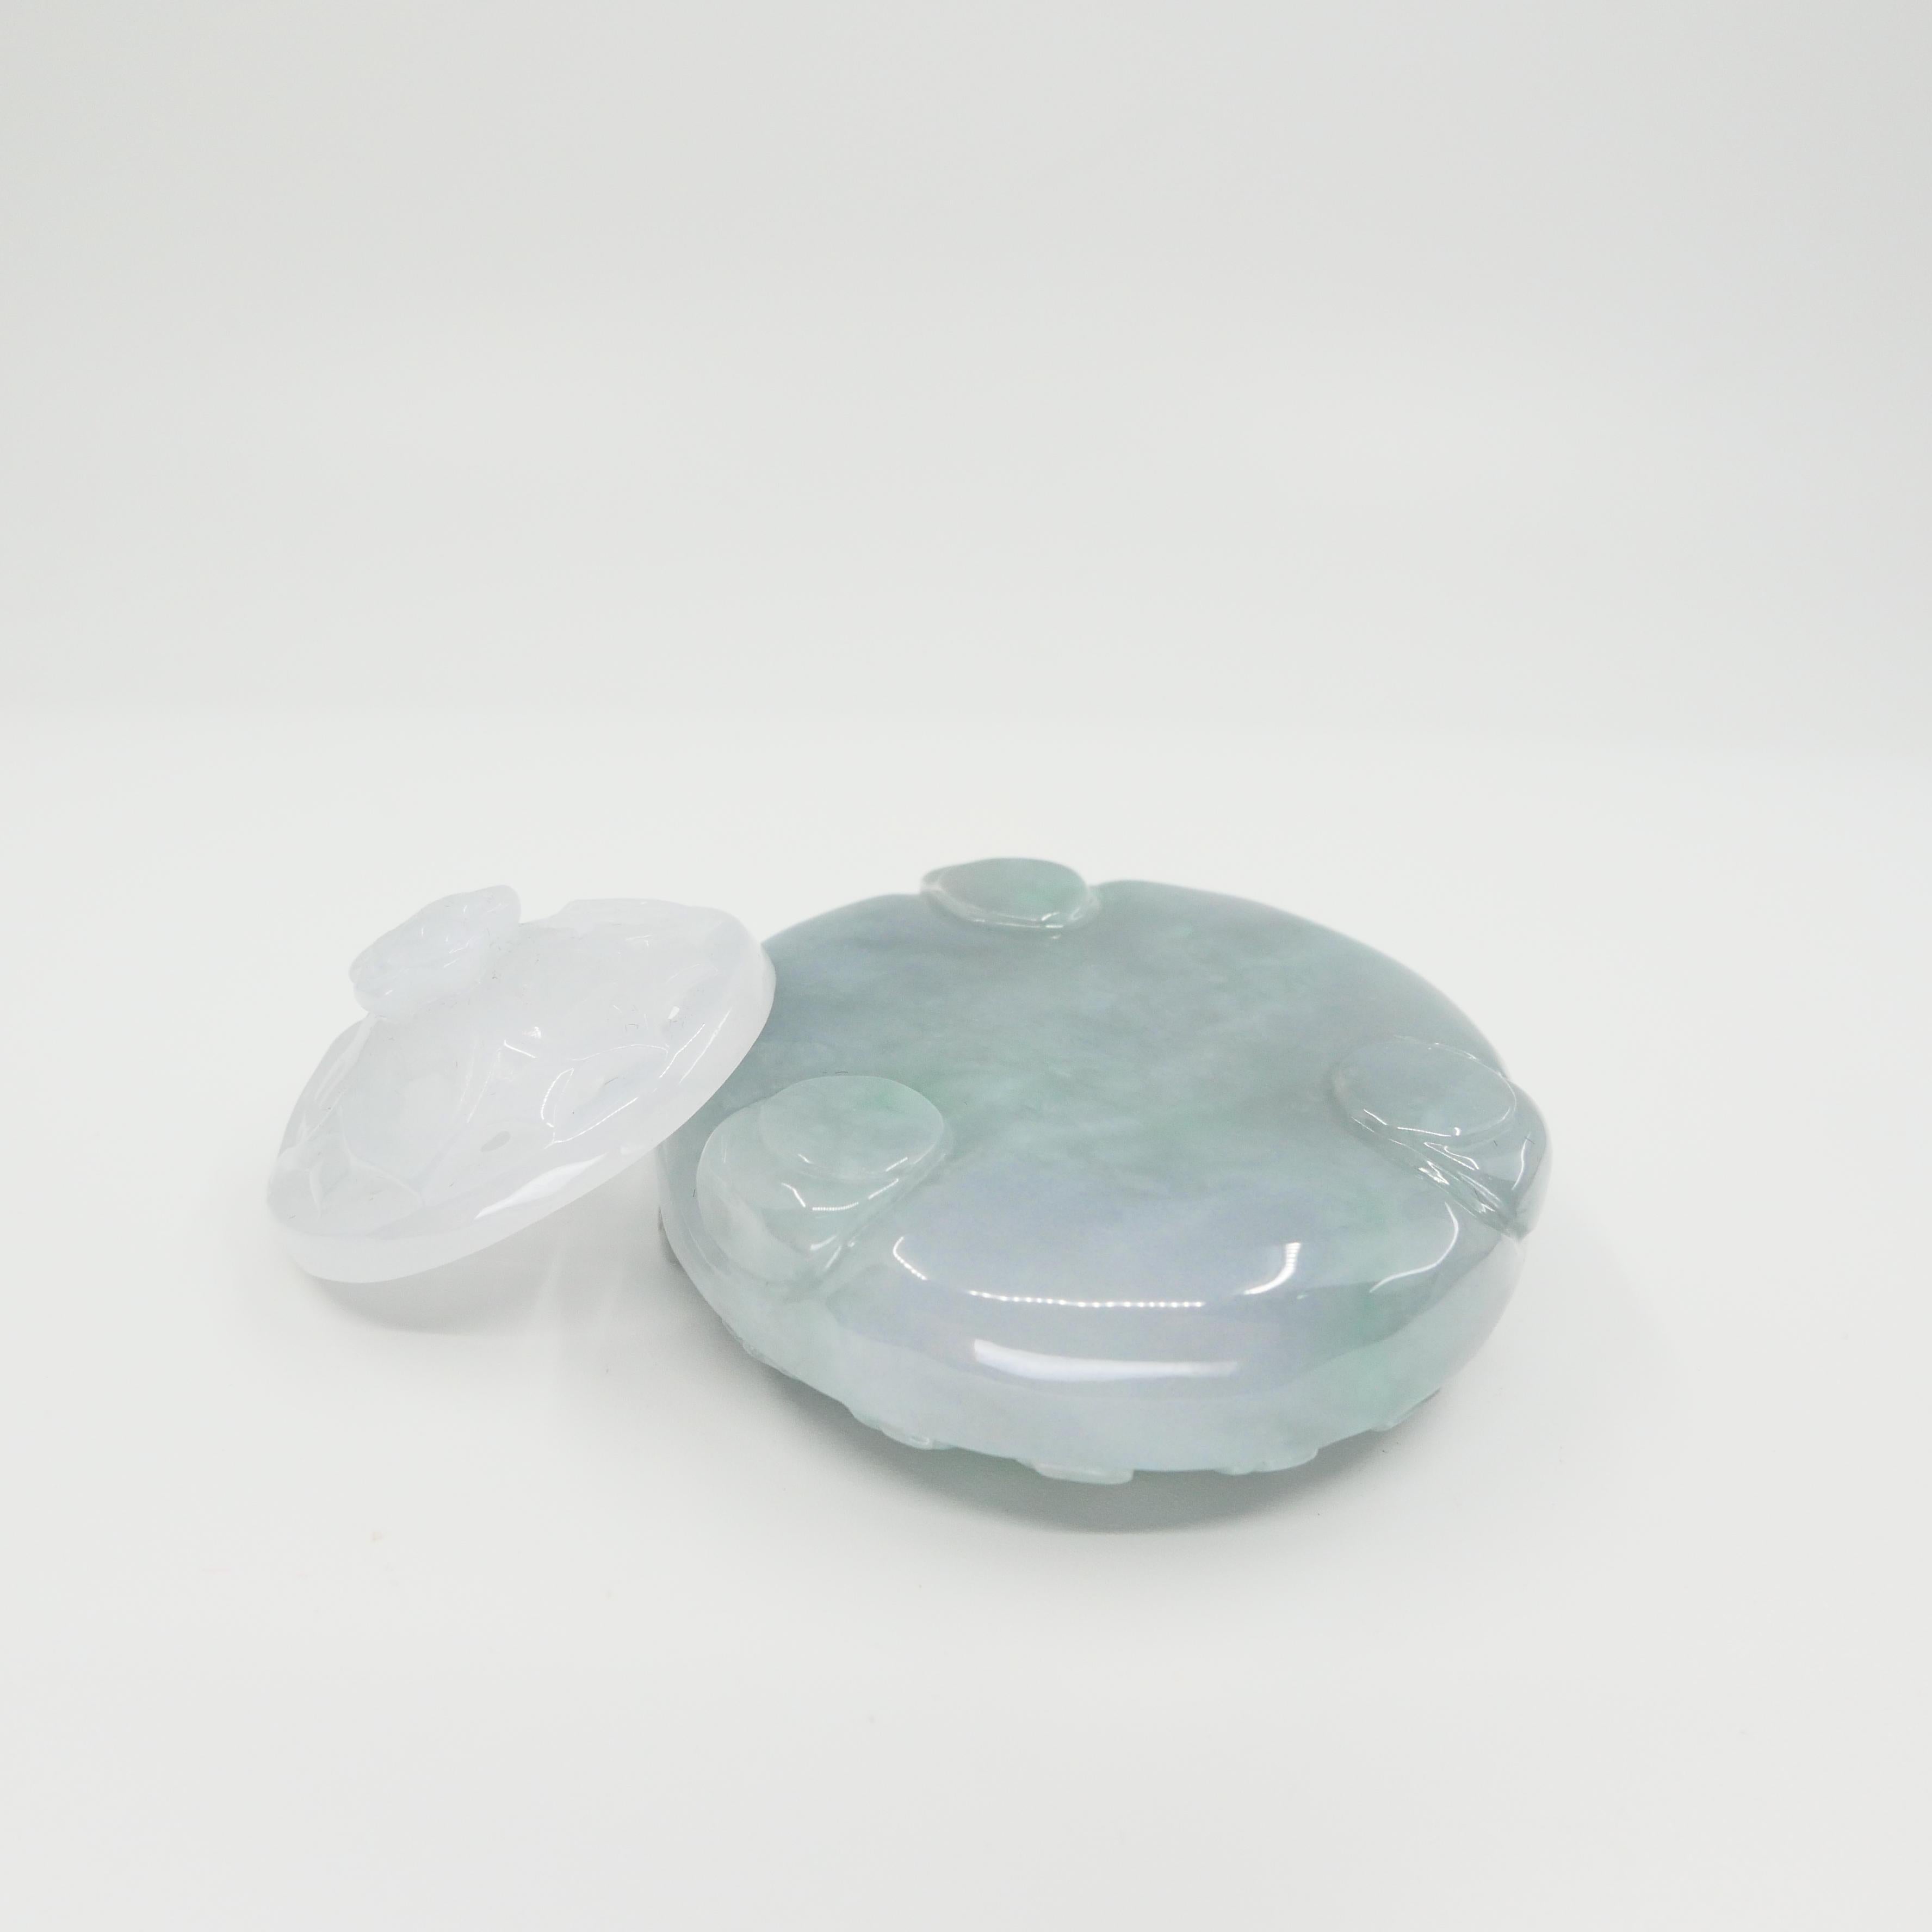 Certified Type A Jadeite Jade Container, Incense Burner, Ring Holder and More 1